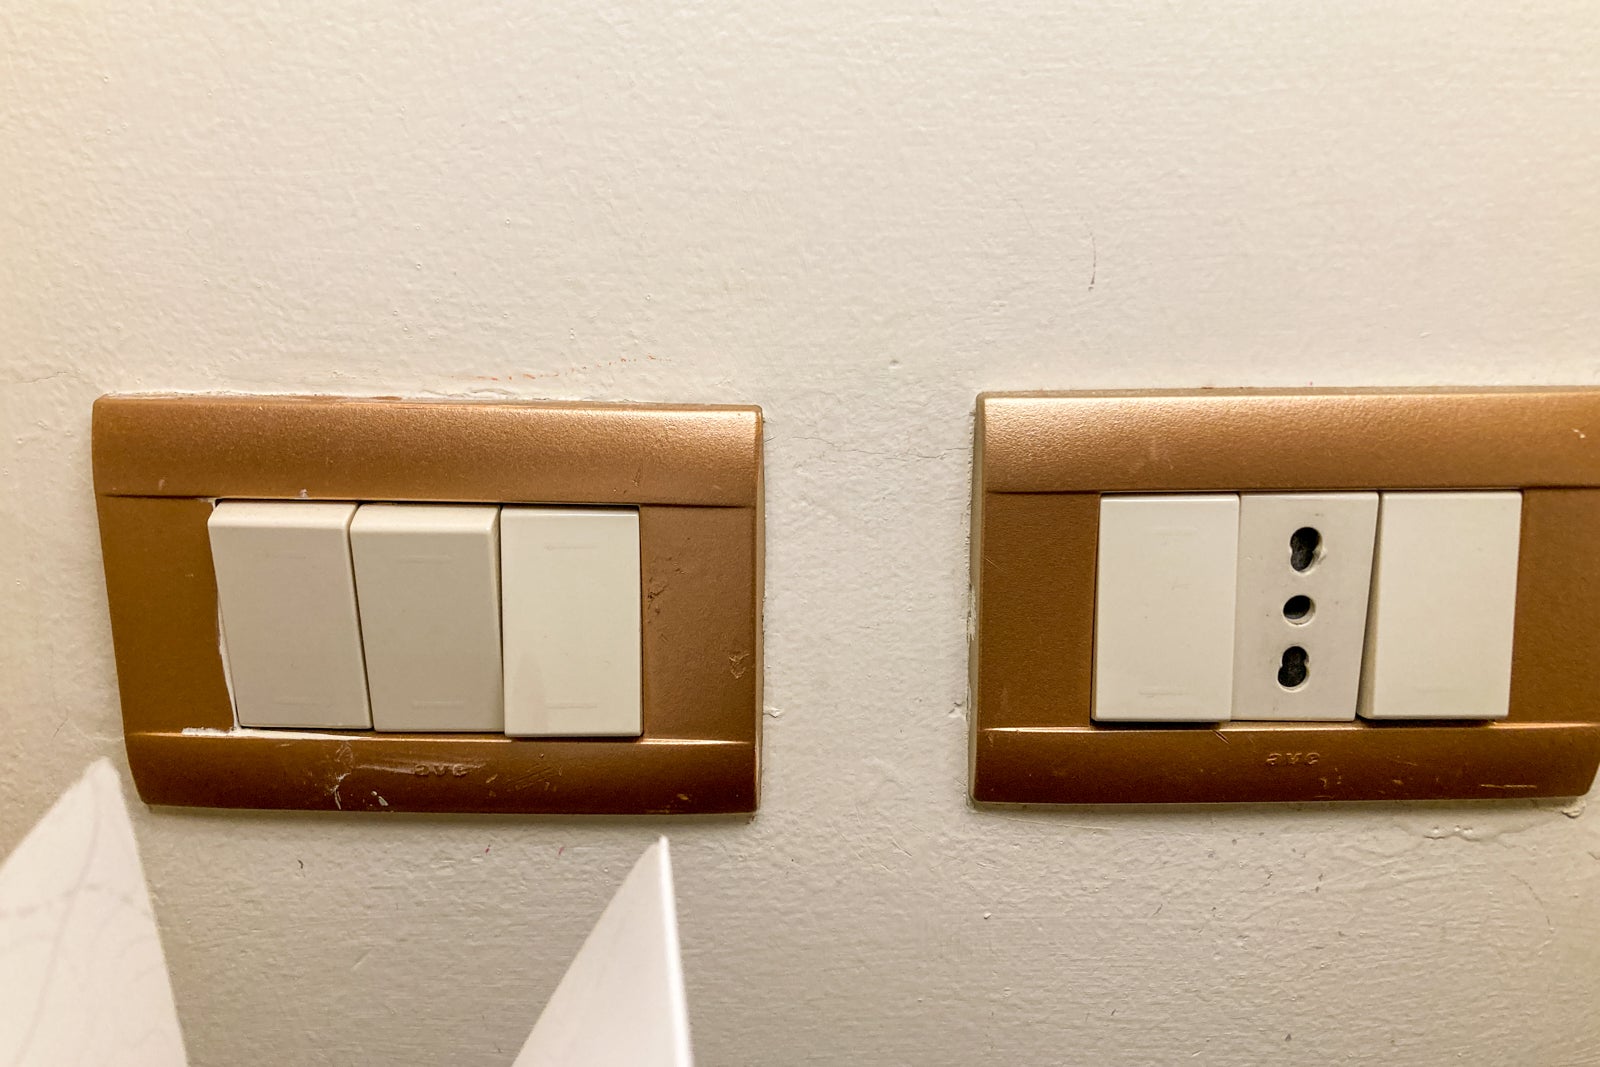 outlets and light switches on the wall